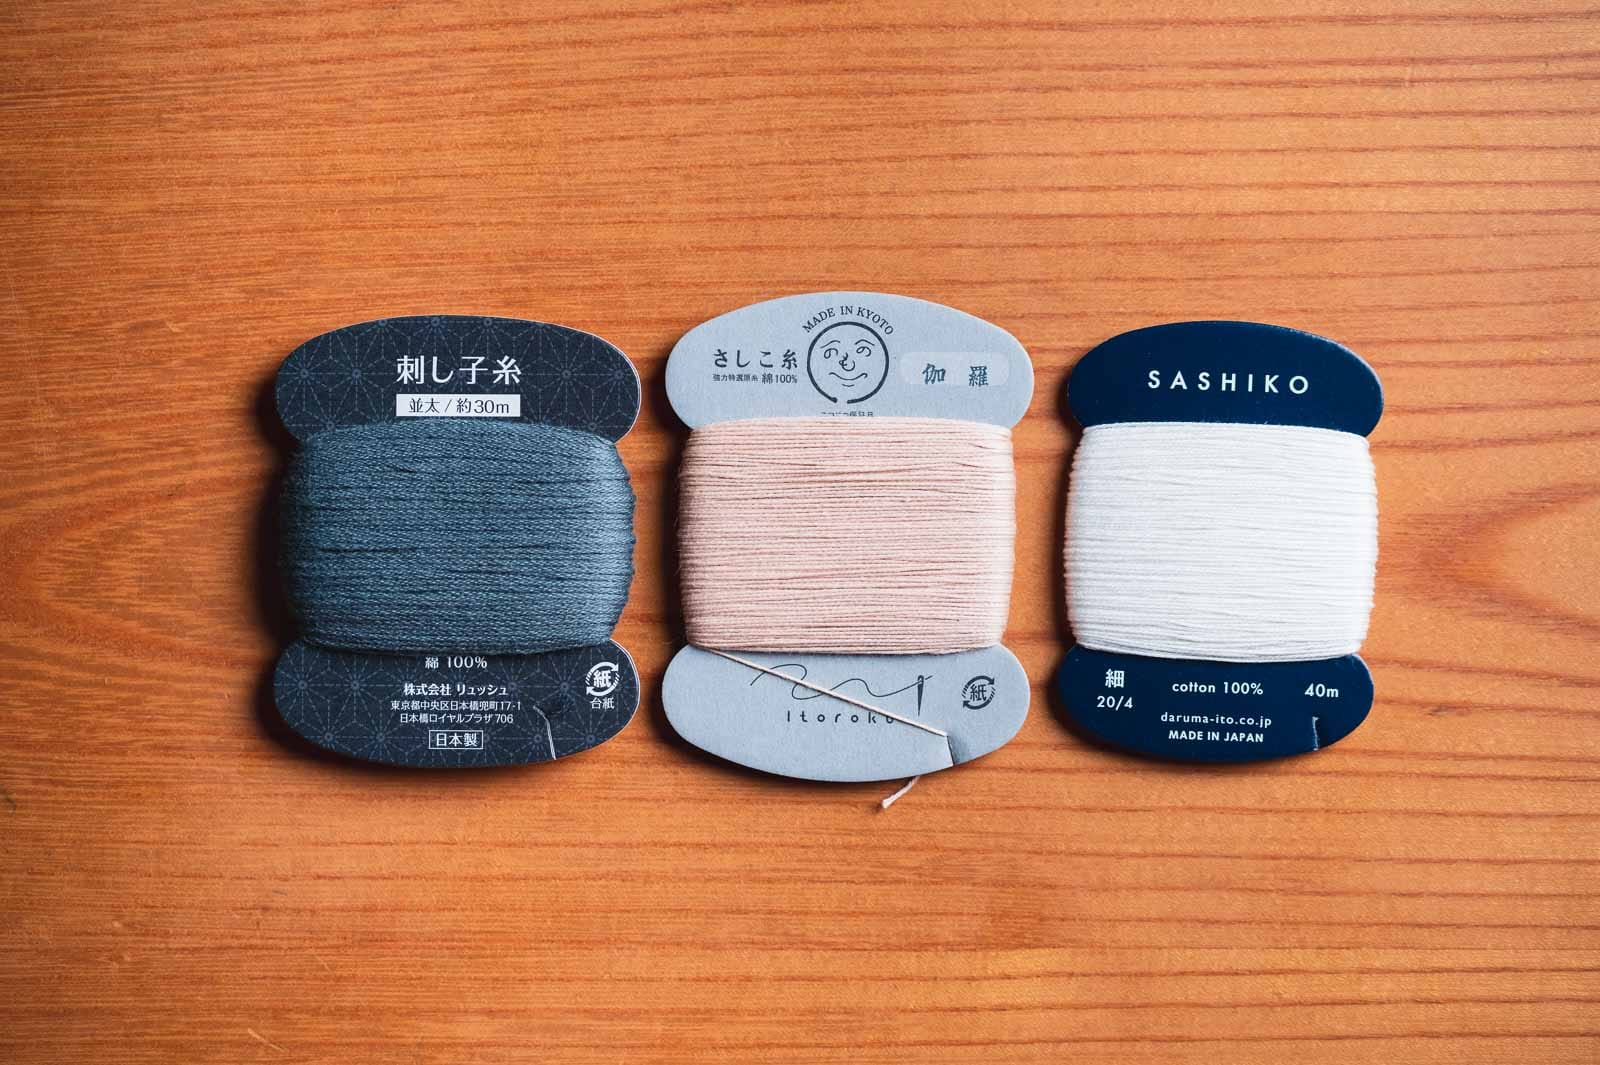 Three different sashiko thread brands on cards in different colors.